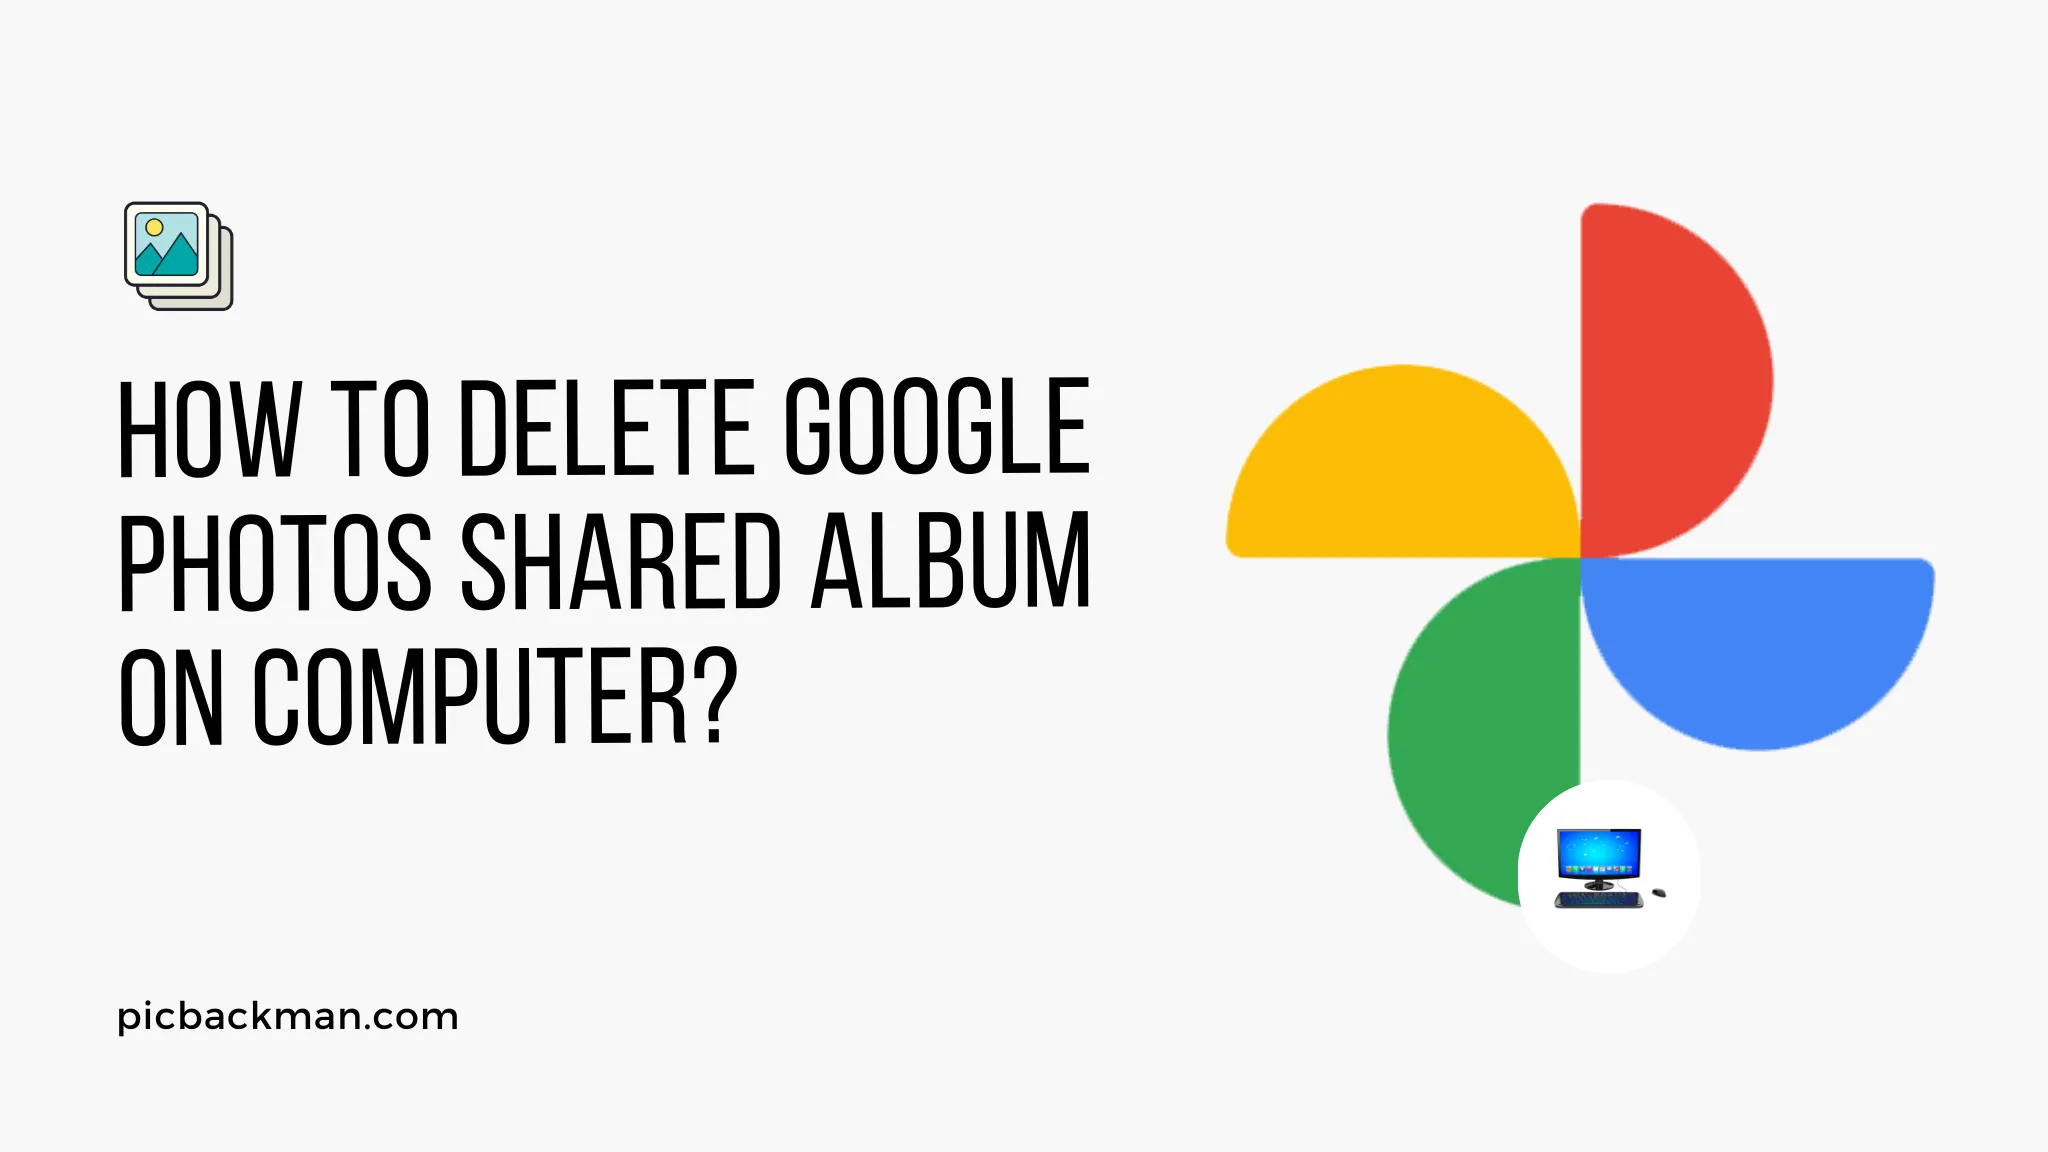 How to Delete Google Photos Shared Album on Computer?